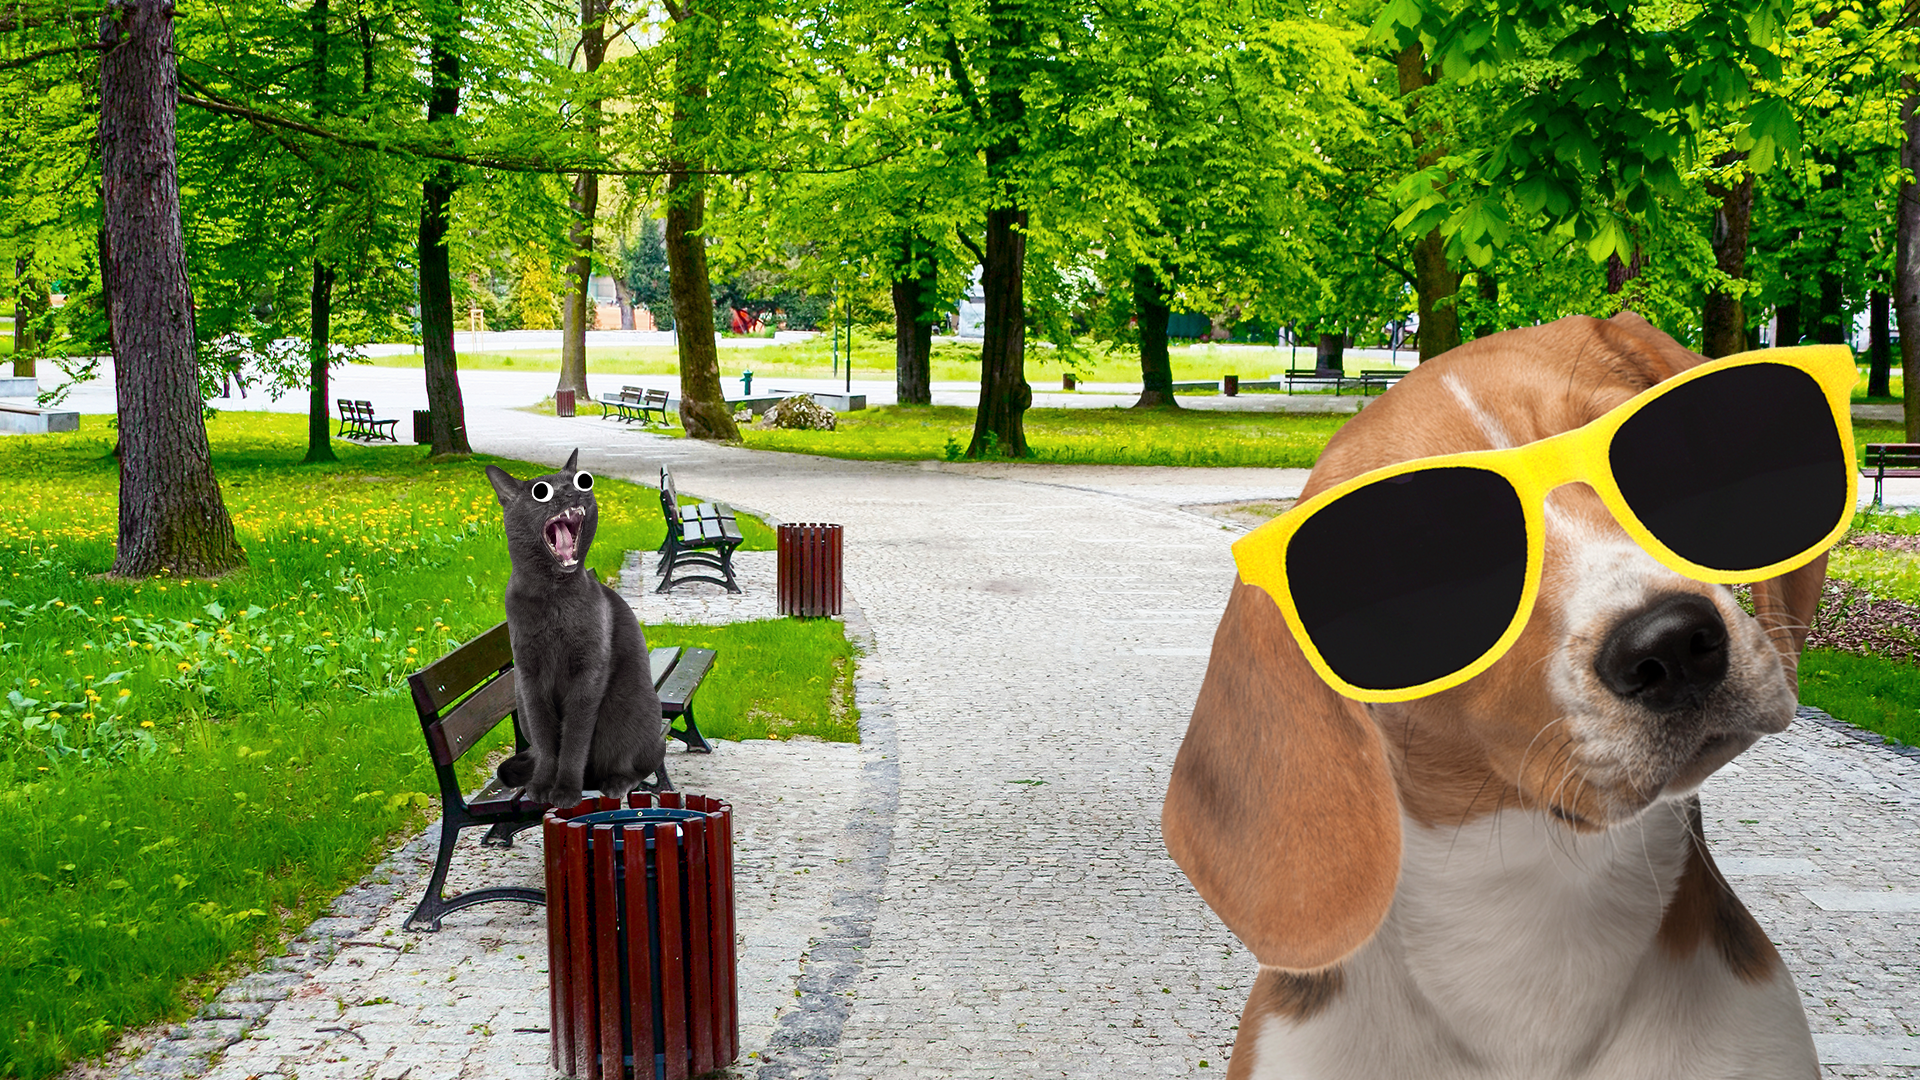 Cool dog and cat in the park